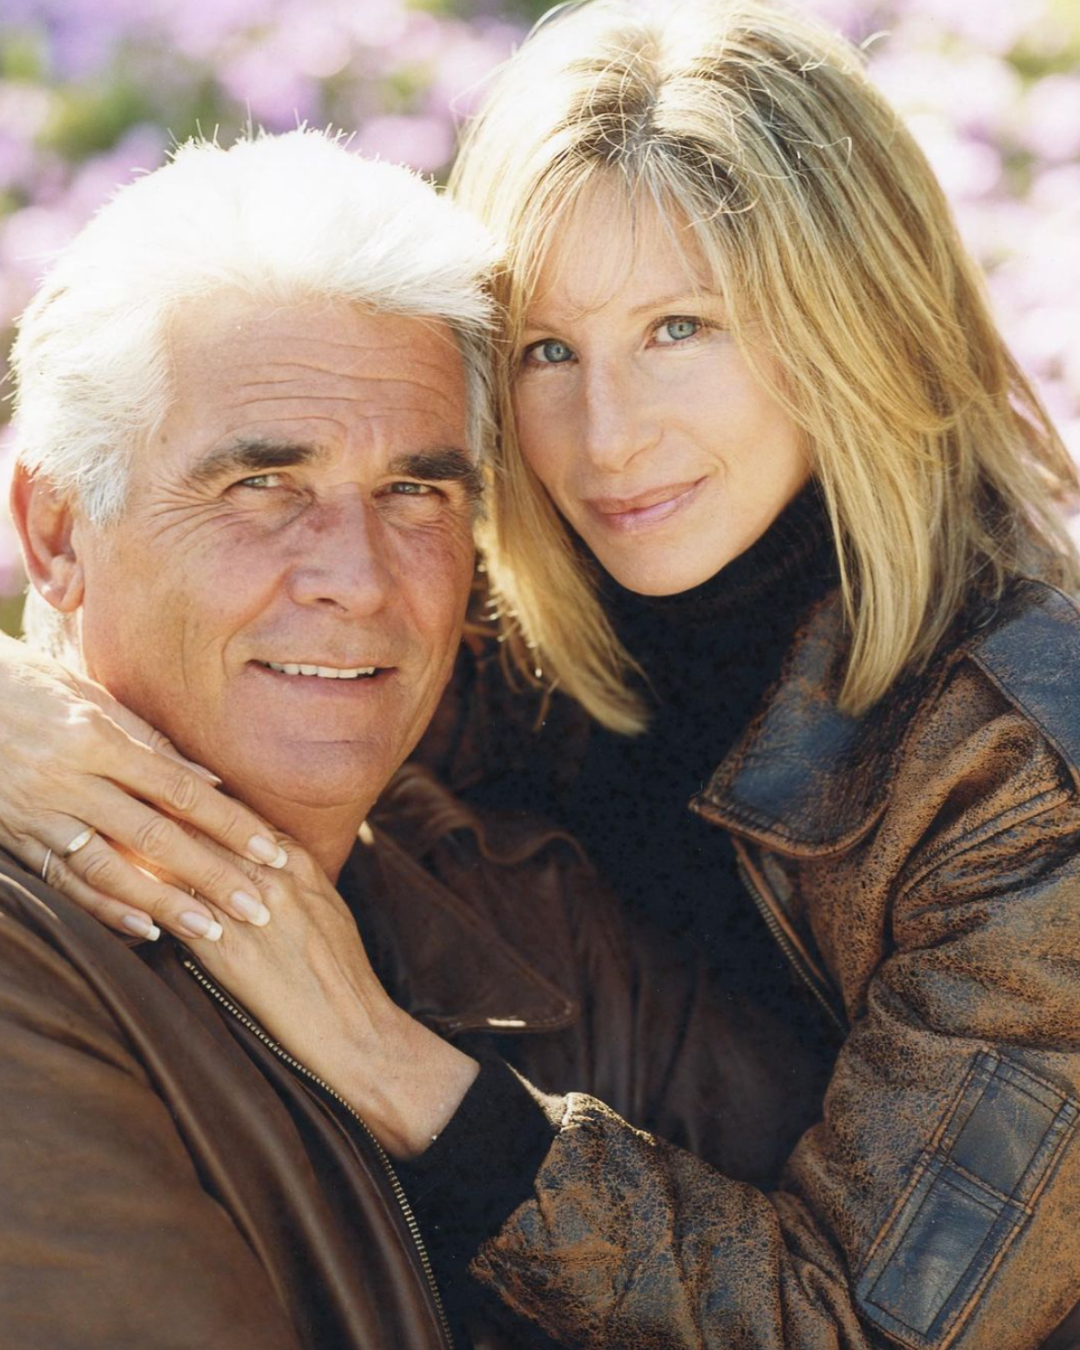 ‘I’ll Only Screw It Up’: James Brolin on Making a Speech after Barbra Streisand Serenaded Him at Their Wedding